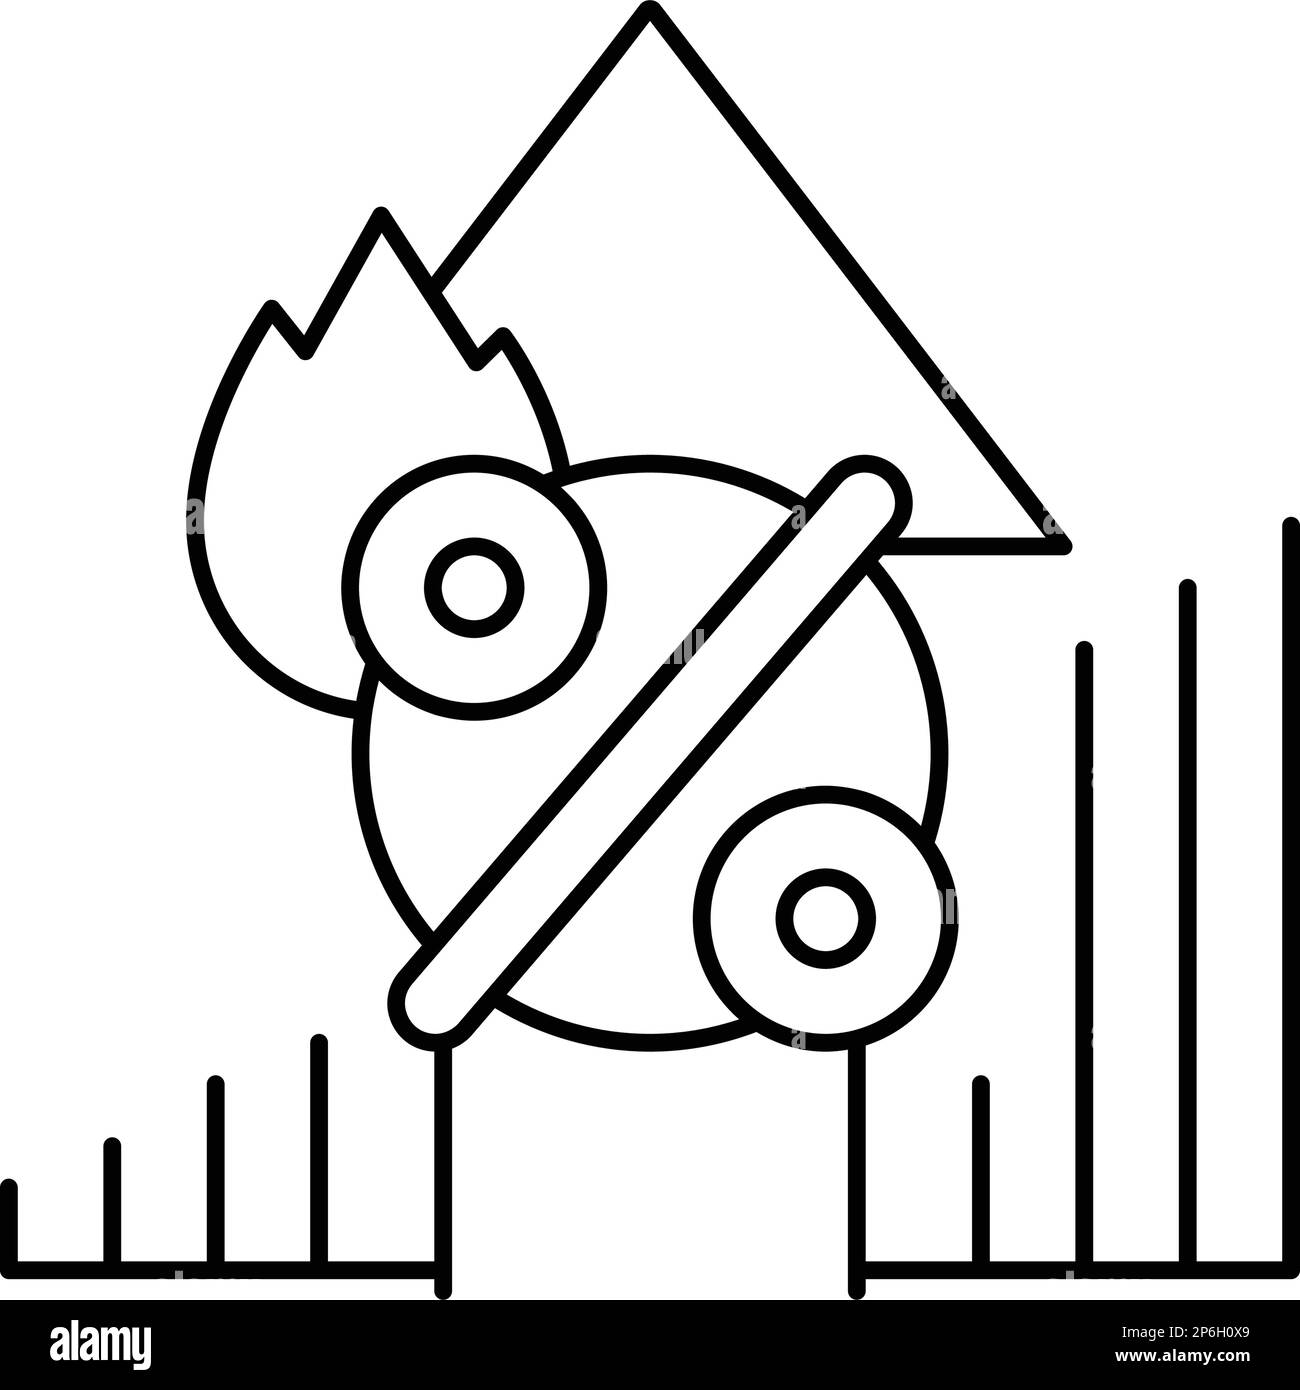 inflation financial crisis line icon vector illustration Stock Vector